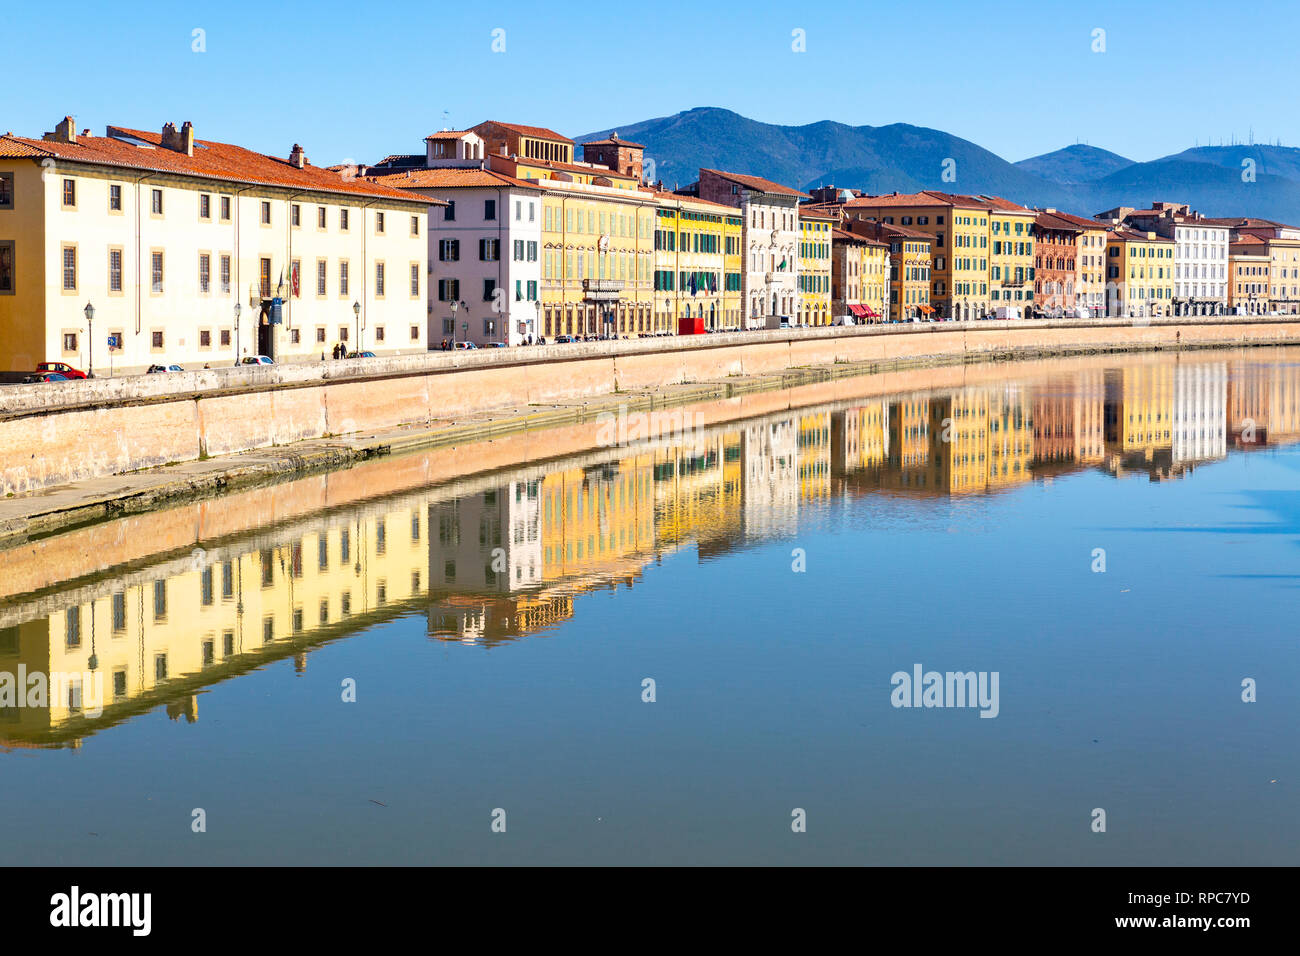 Pisa city centre in Italy with buildings reflected in the Arno River Stock Photo